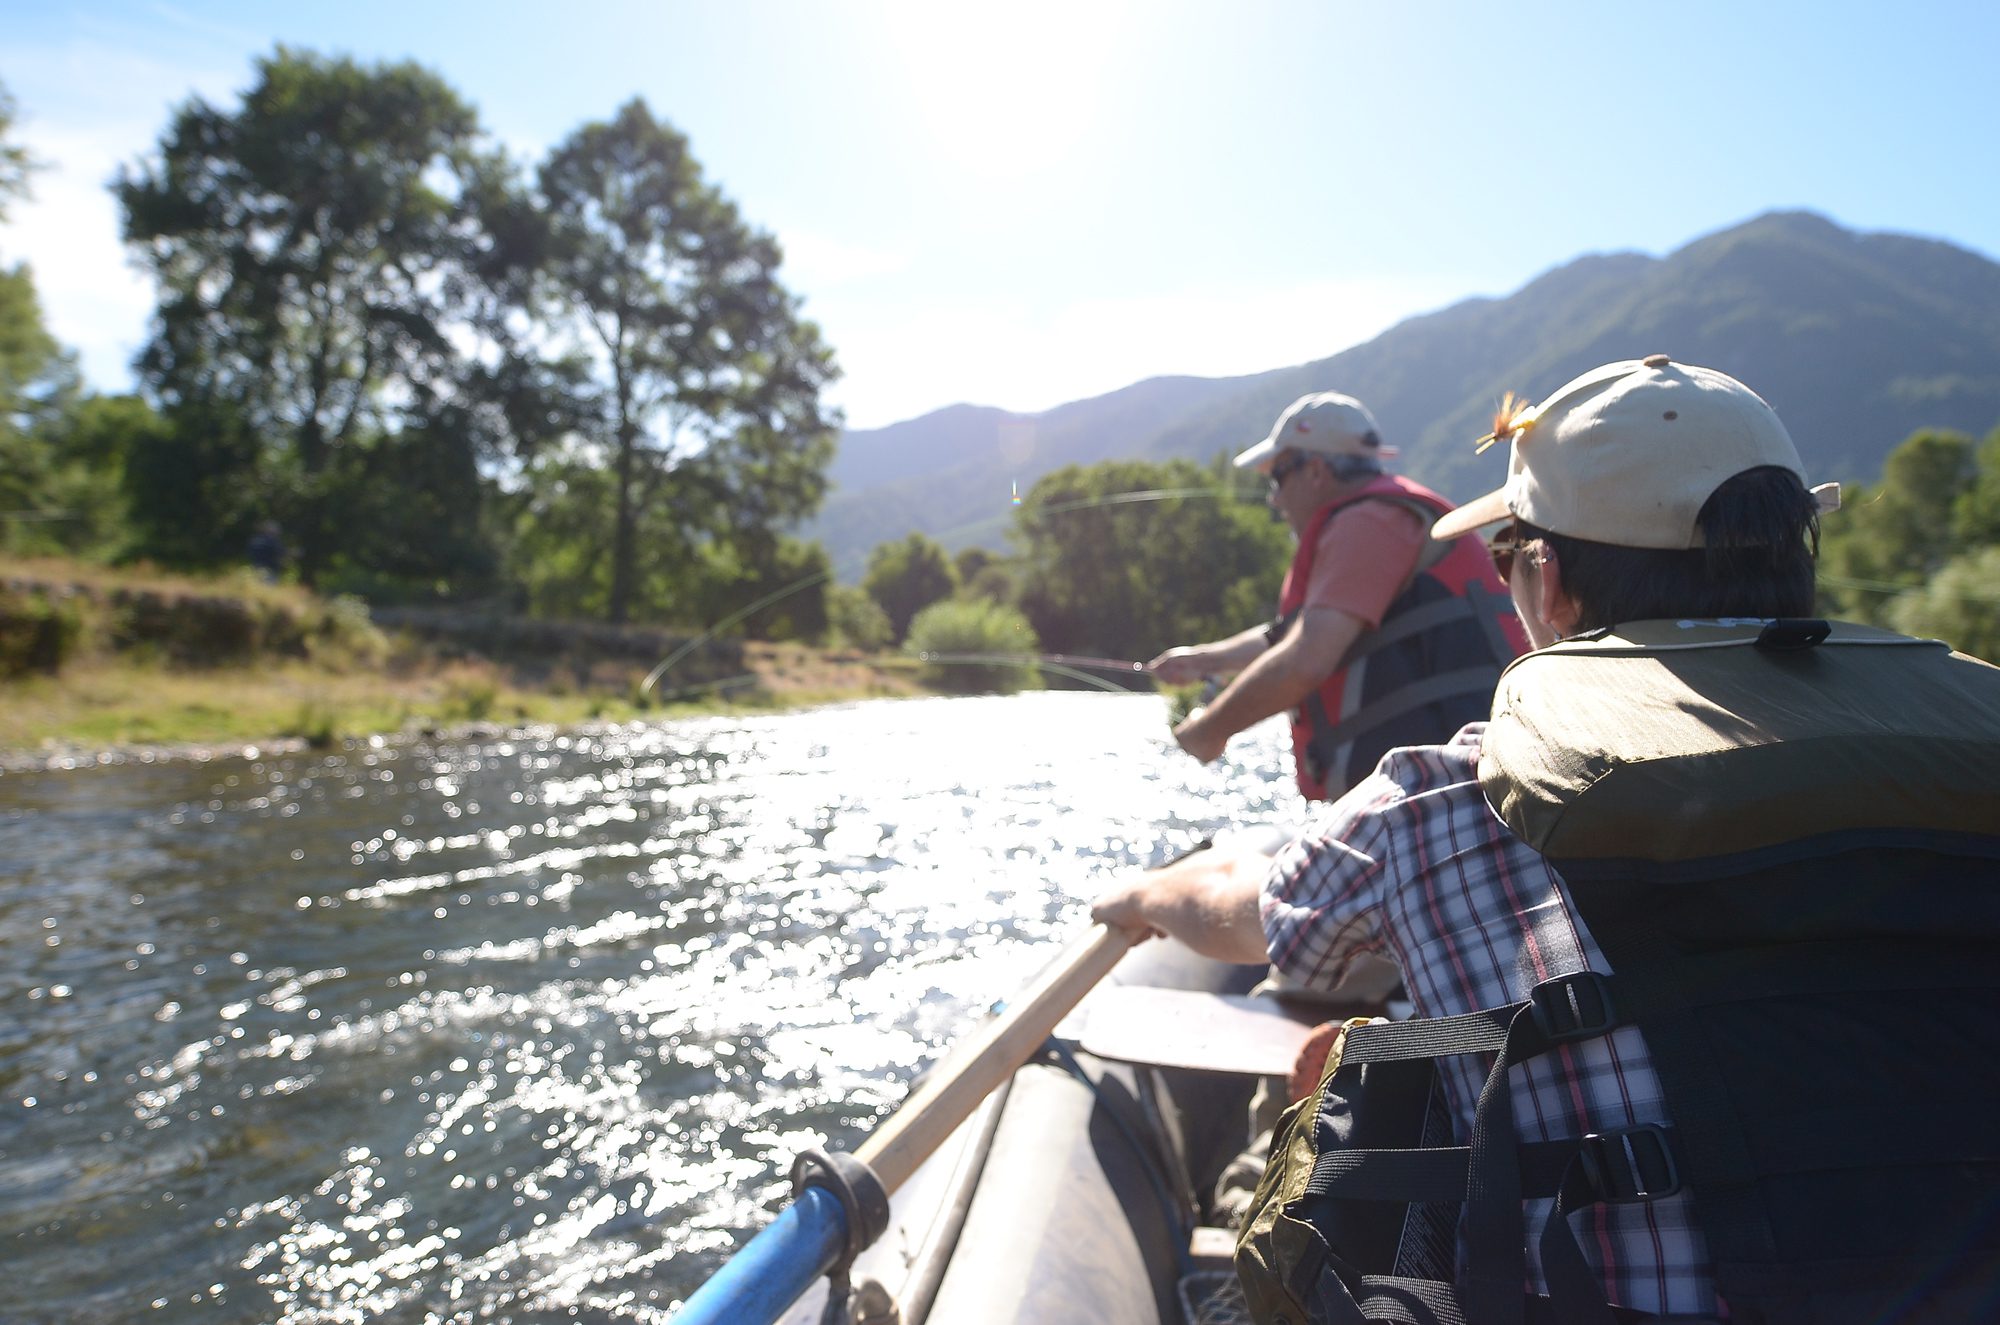 Group of travelers in boat, fishing along river in Lake District surrounded by trees and mountains